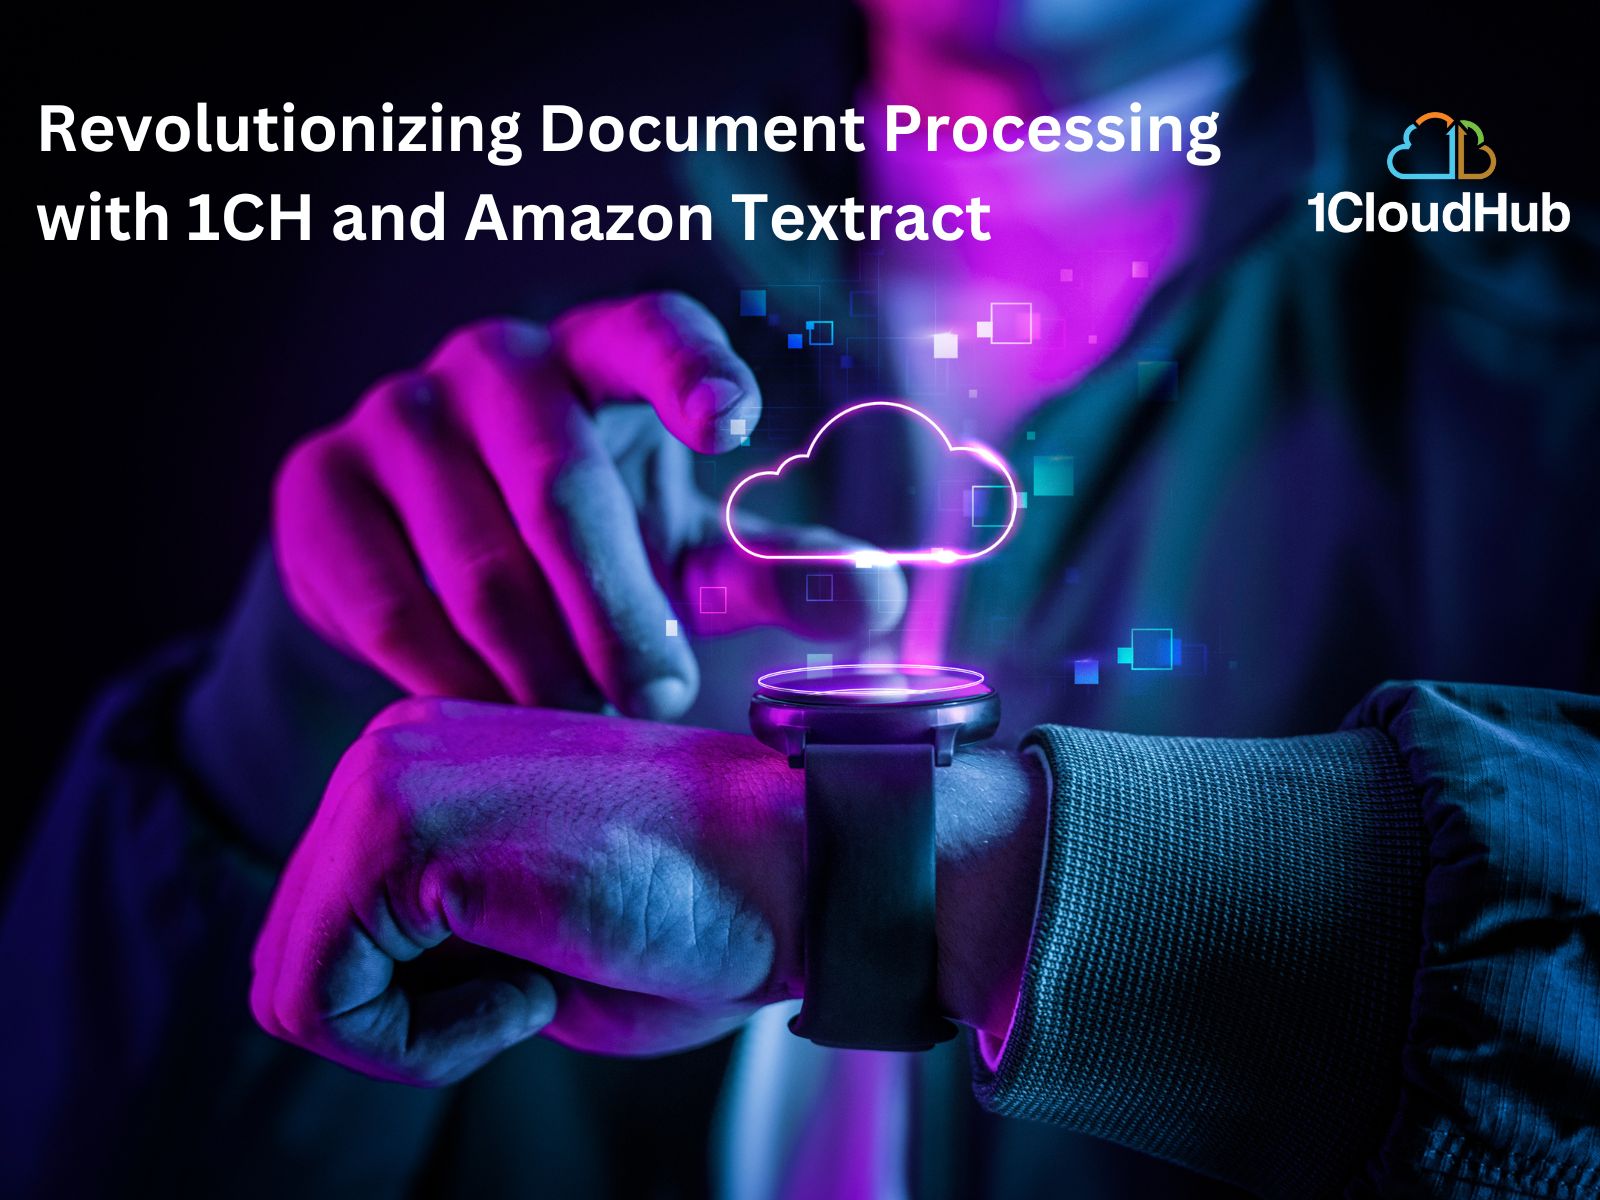 Revolutionizing Document Processing with 1CH and Amazon Textract